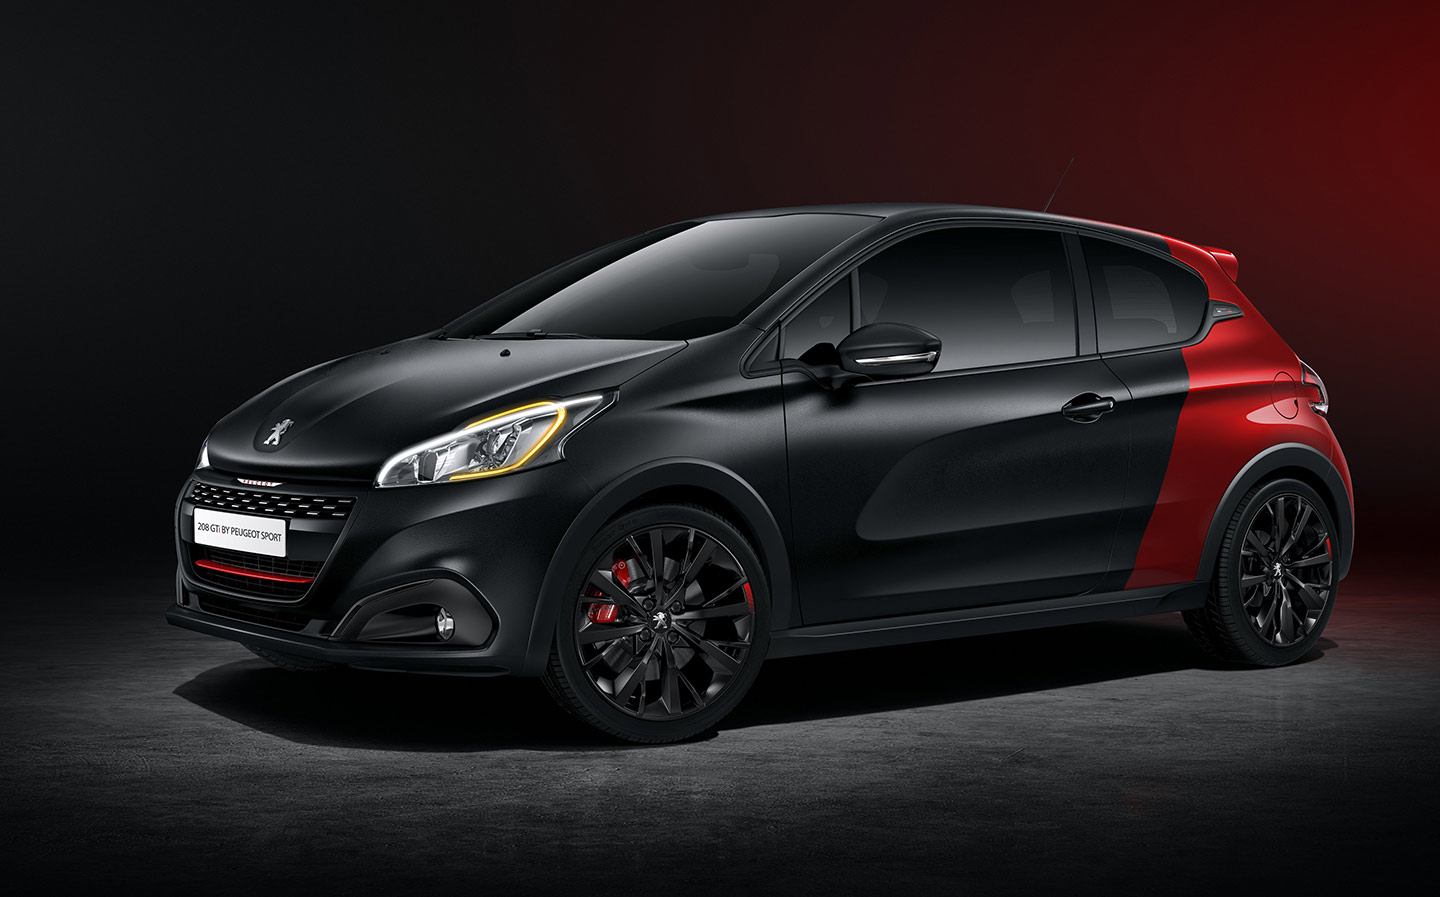 The Clarkson review: 2014 Peugeot 208 GTi